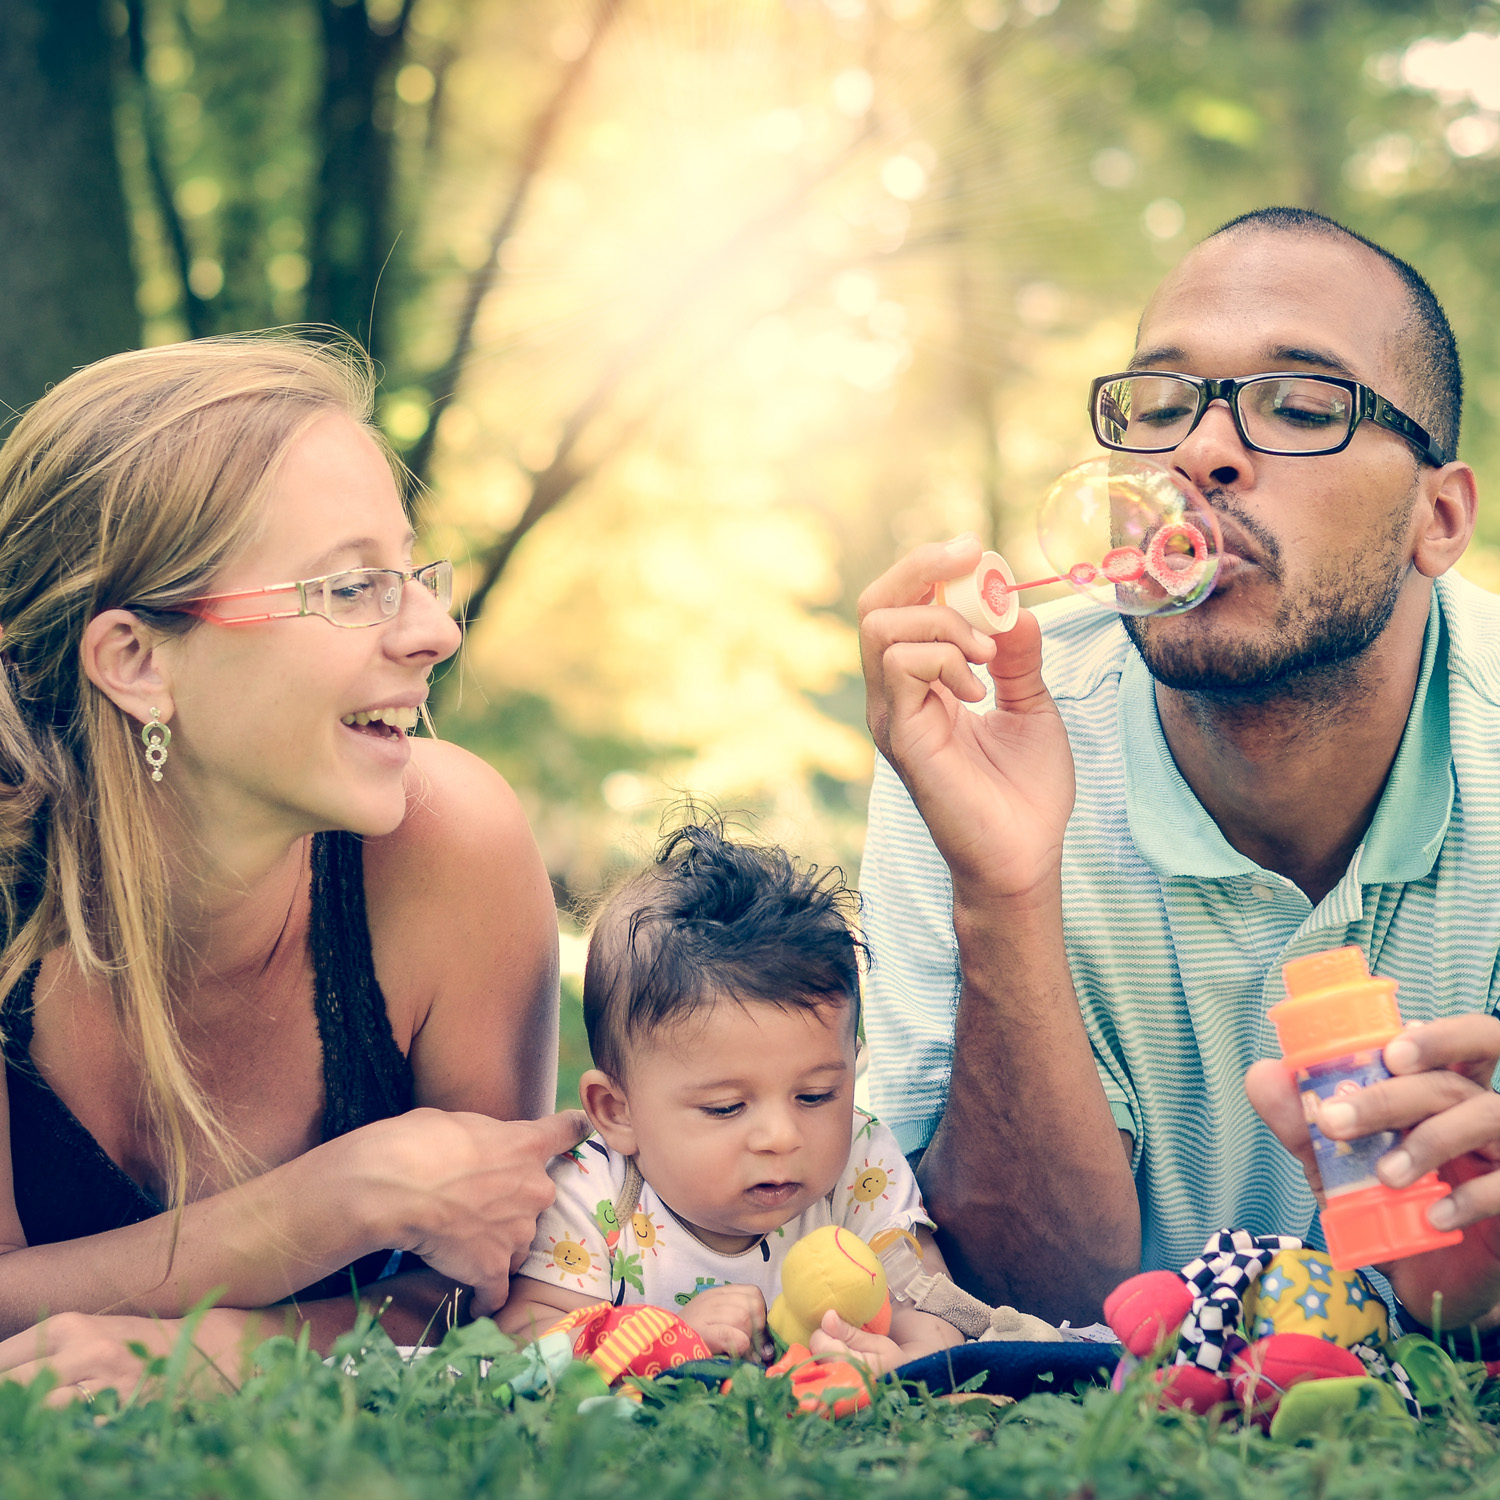 Parents blowing bubbles with young baby